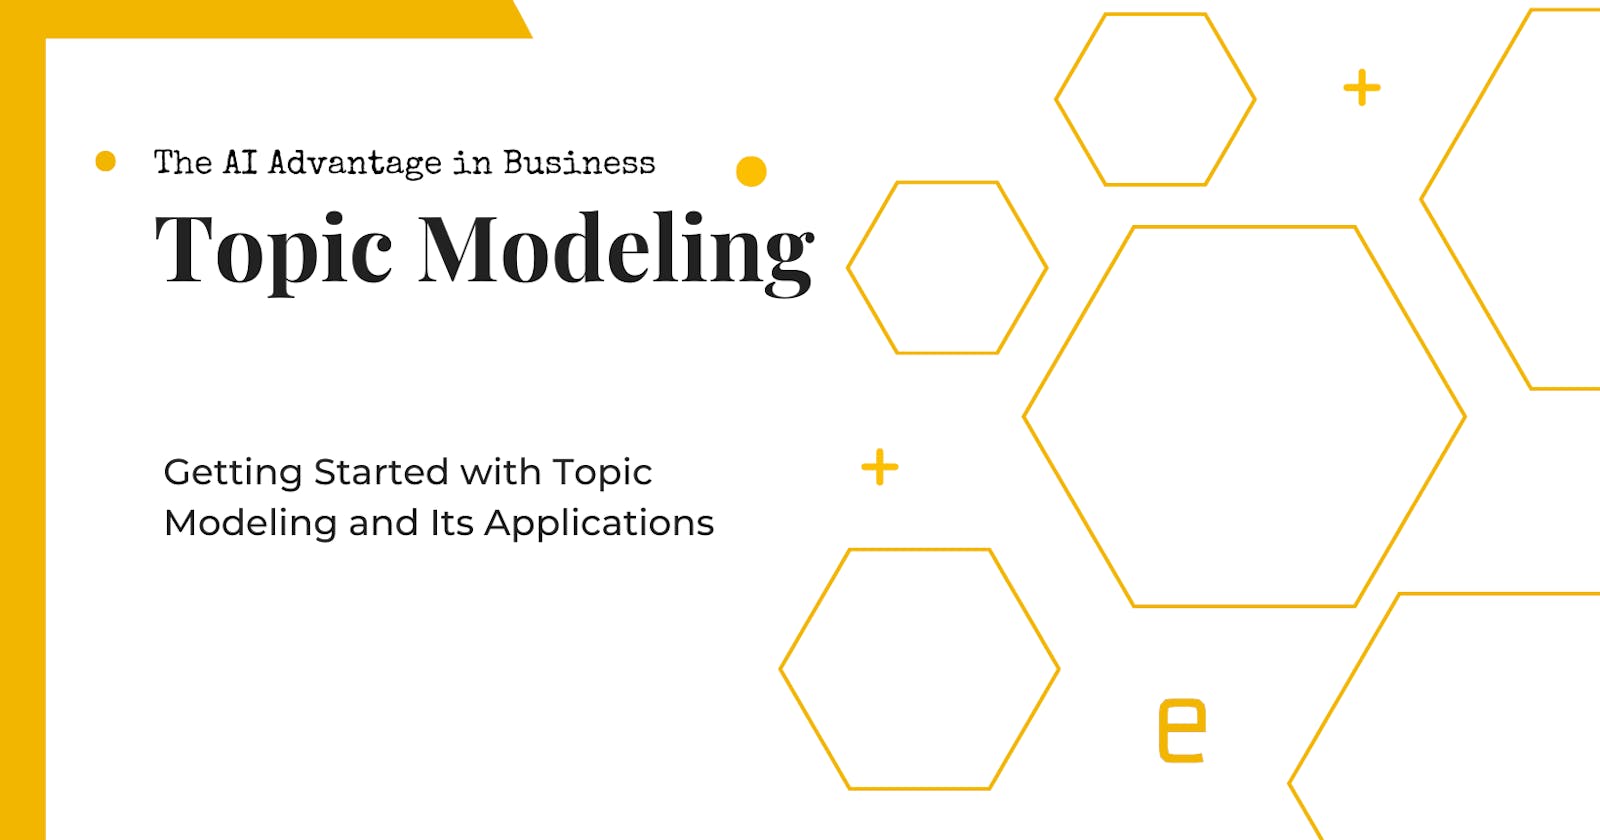 Getting Started with Topic Modeling and Its Applications